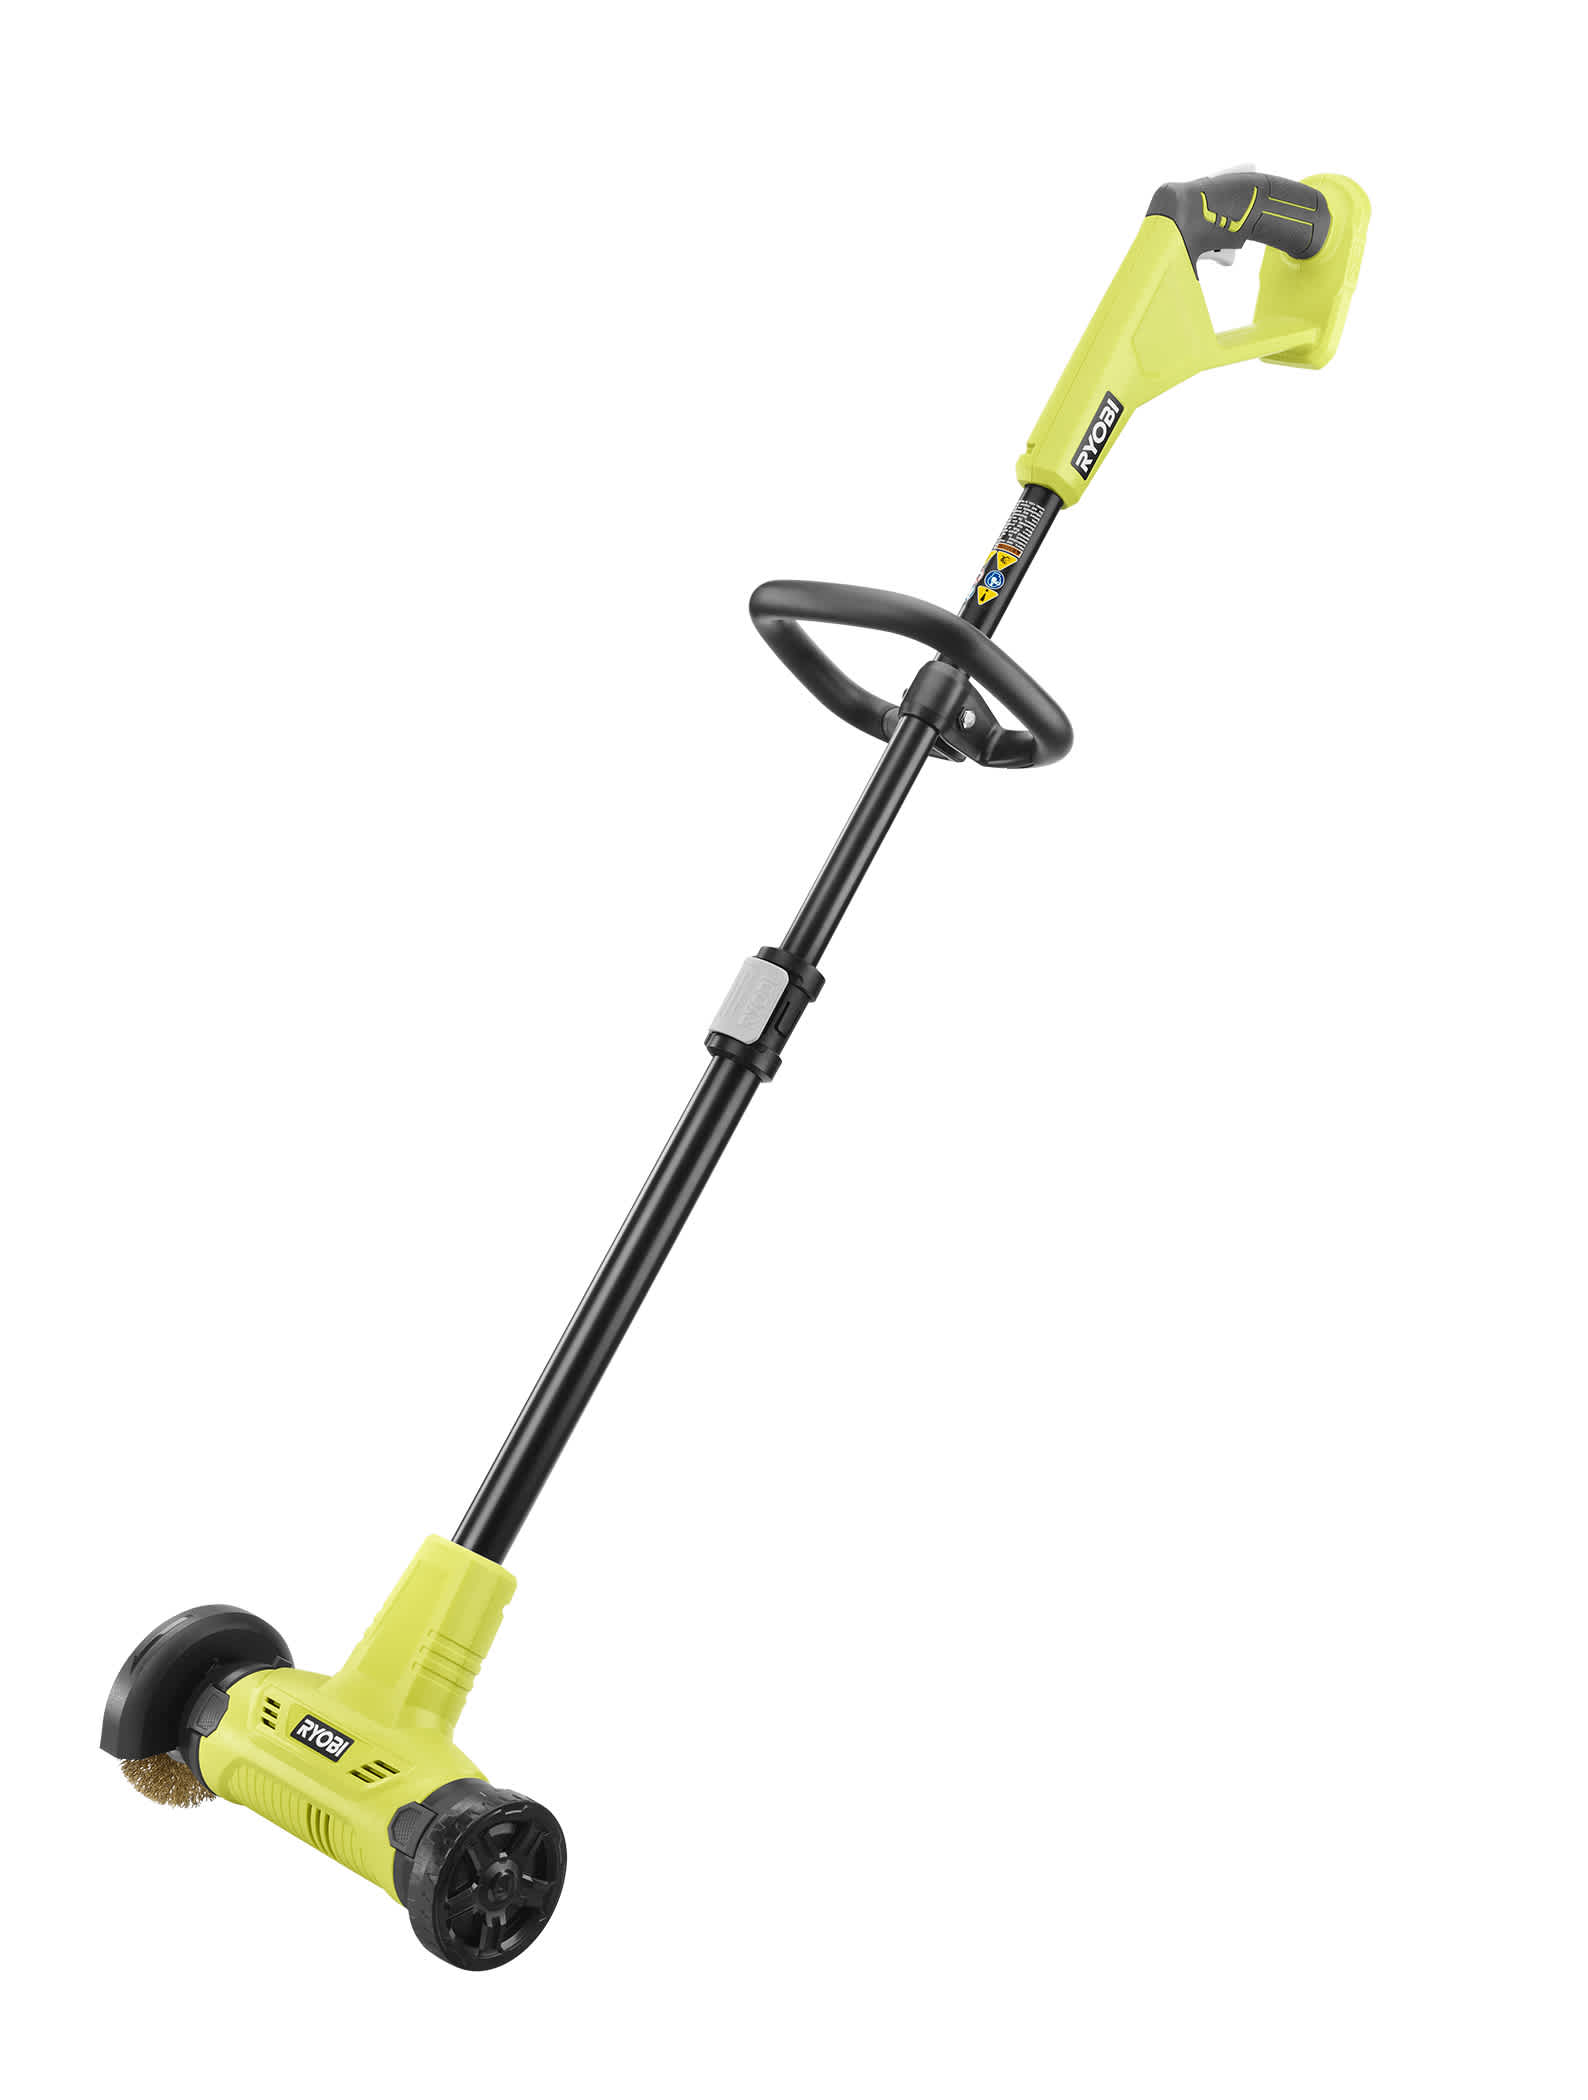 Feature Image for 18V ONE+ OUTDOOR WIRE BRUSH PATIO CLEANER.